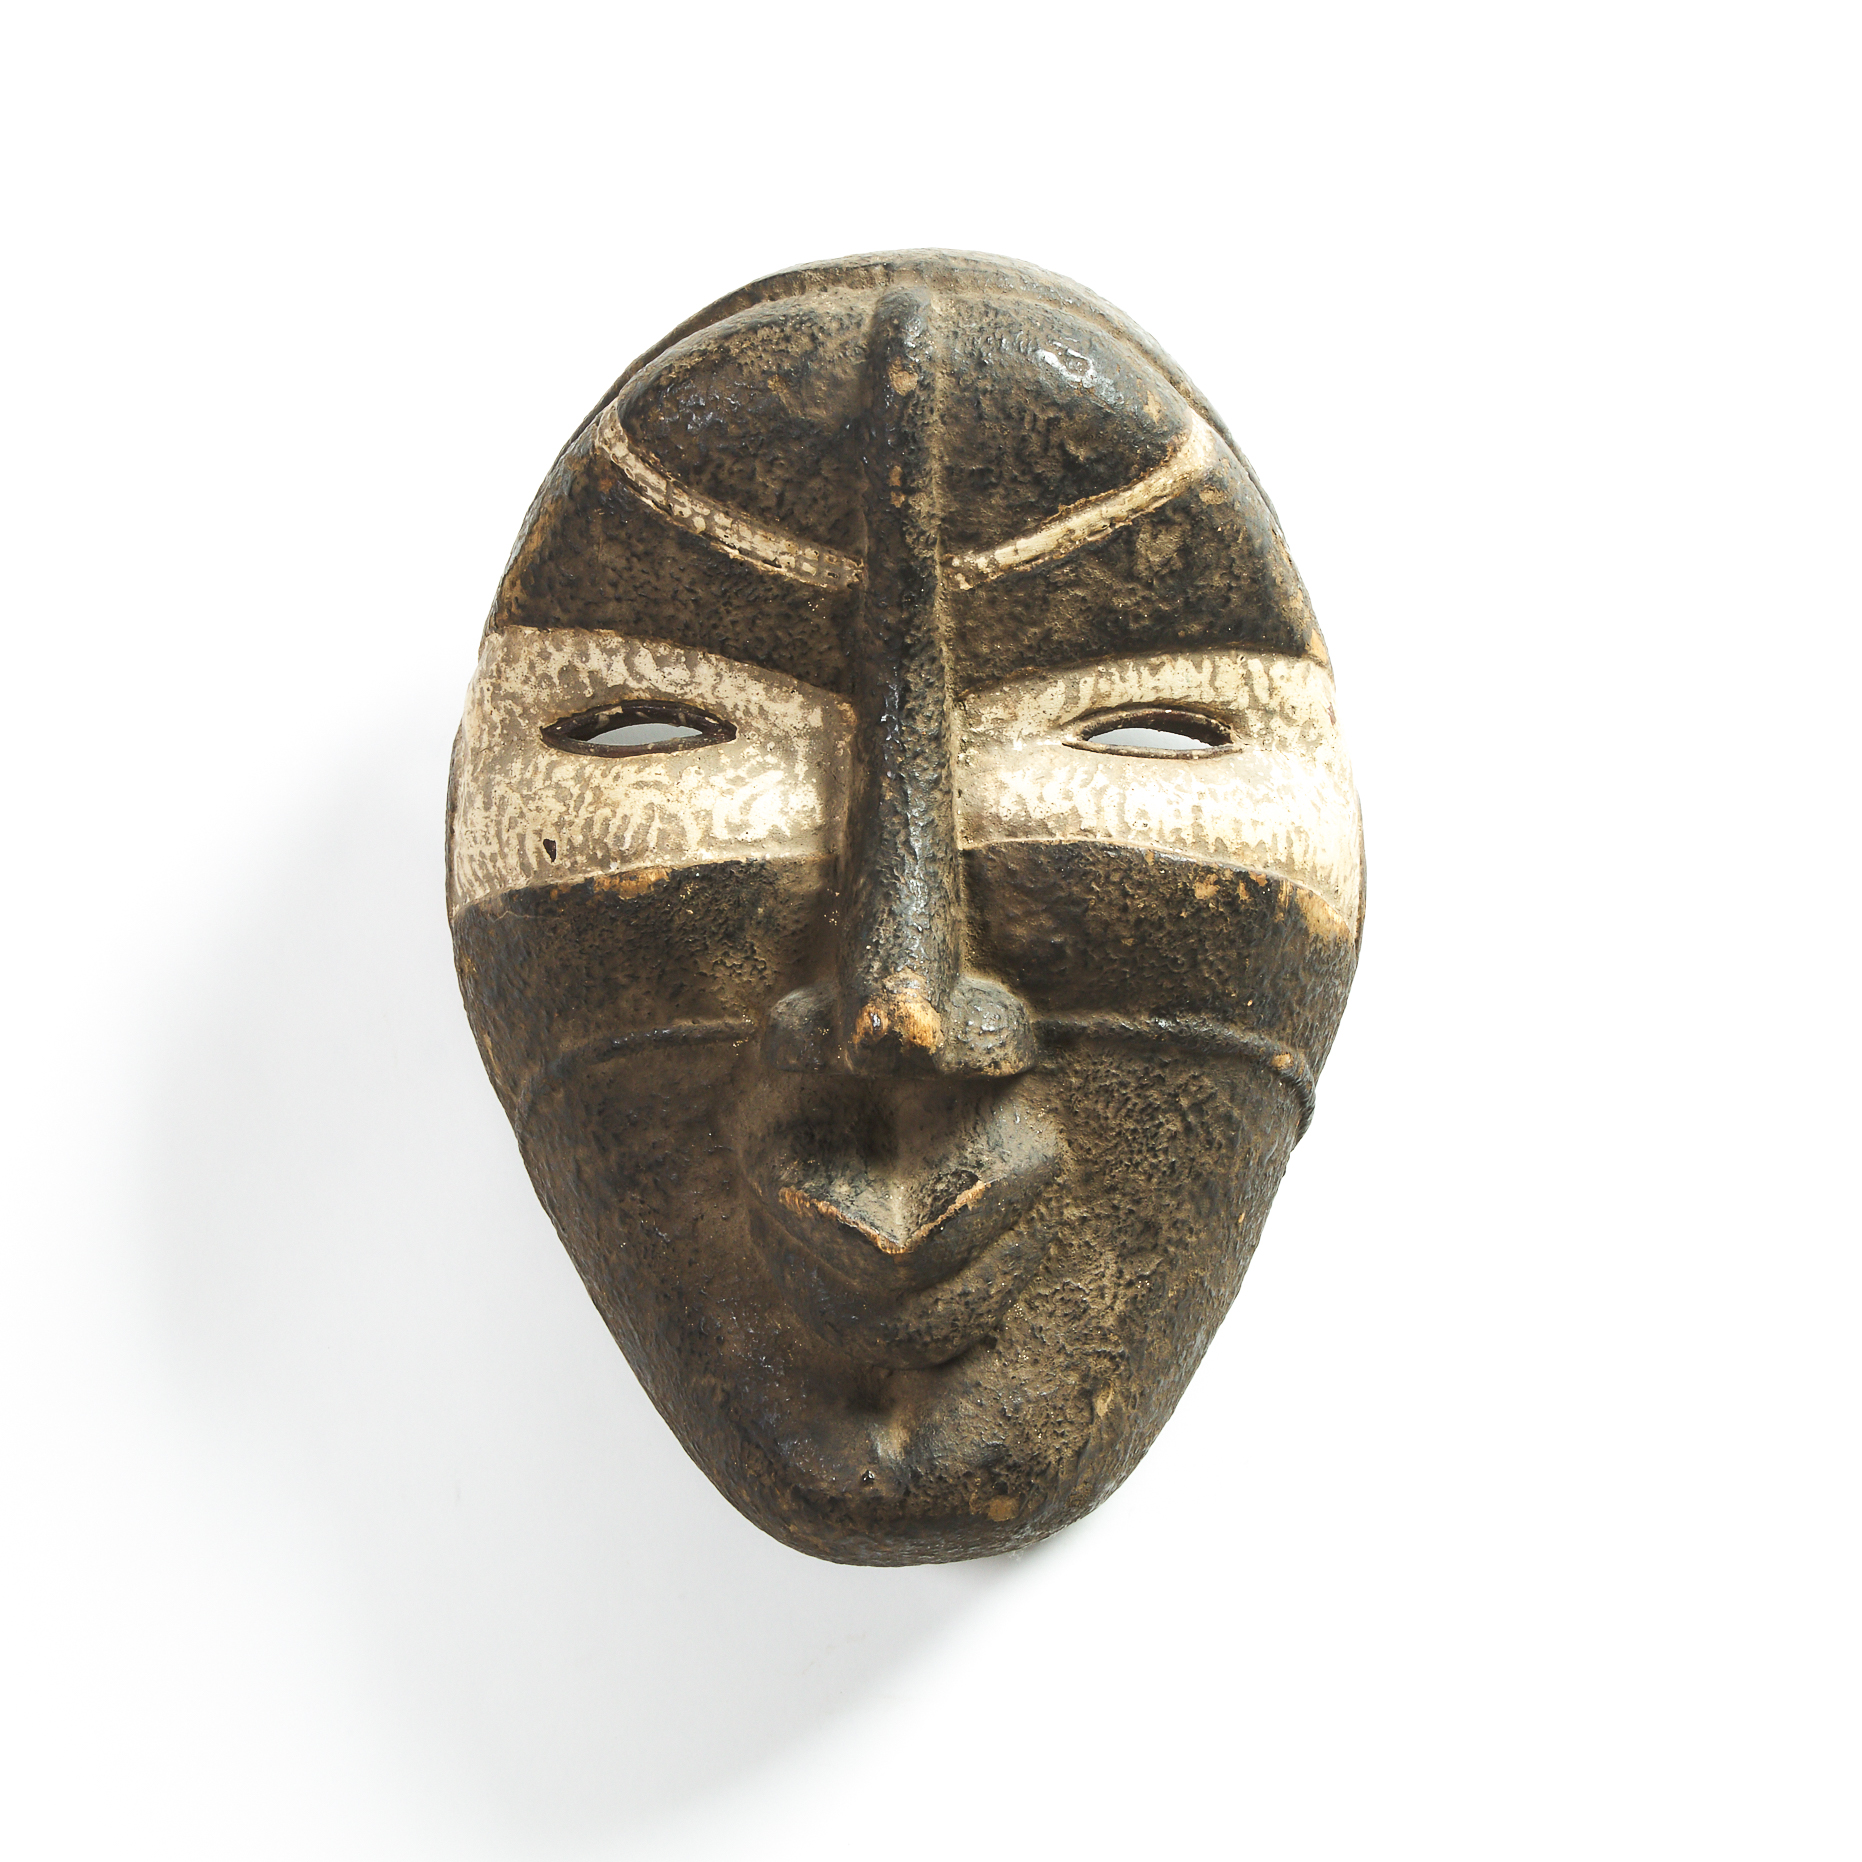 Dan Mask, Ivory Coast/Liberia, West Africa, early to mid 20th century